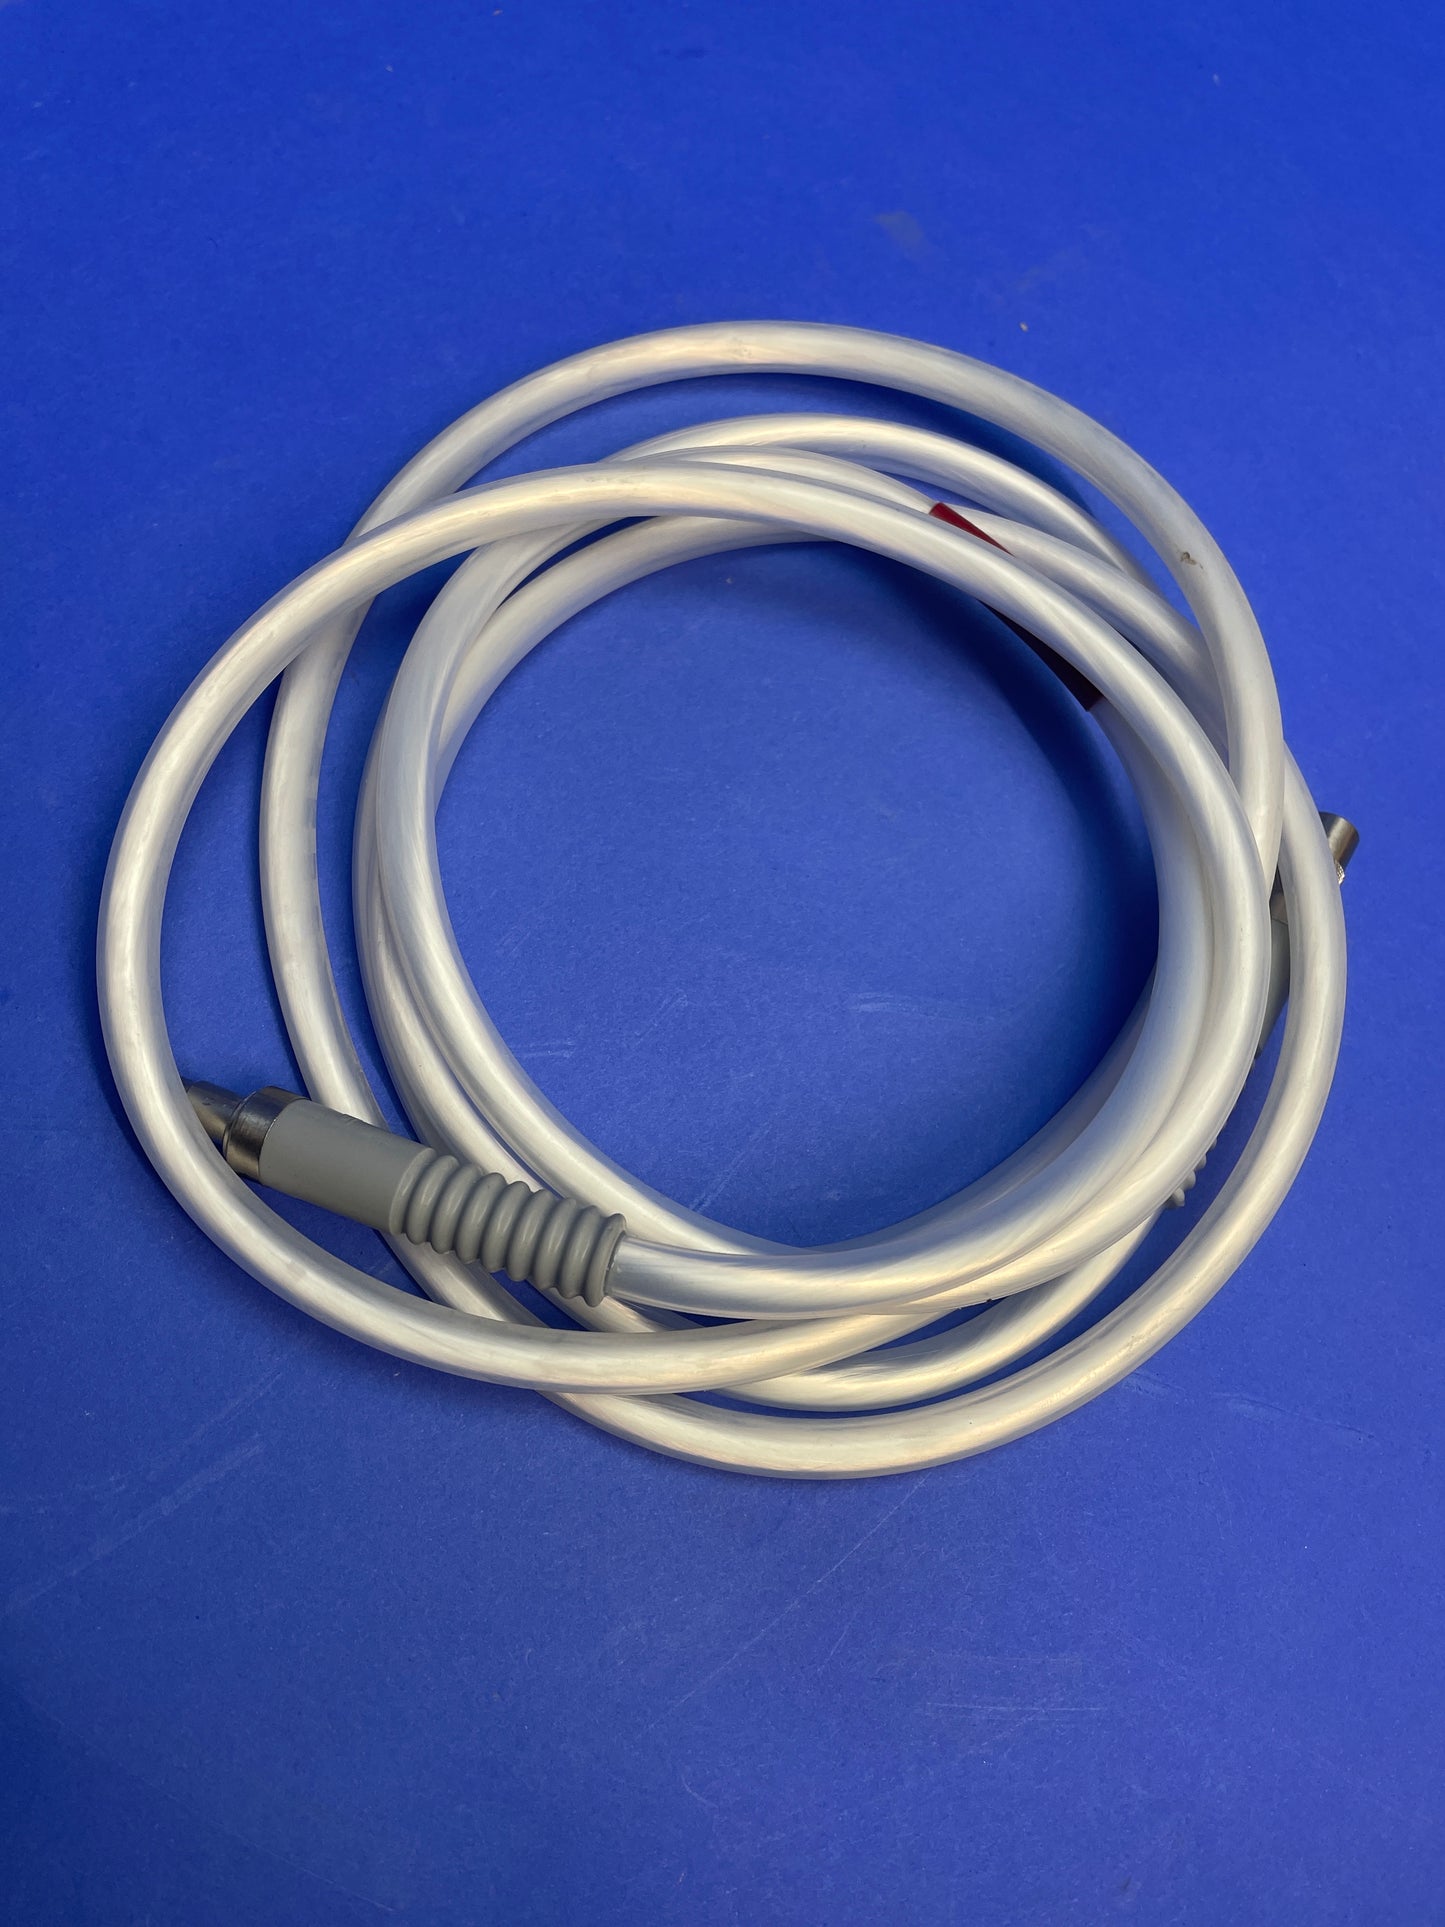 Fiber Optic Light Cable is used with a light source and an adapter/scope to transmit light to a scope in order to conduct a minimally invasive surgical procedure.